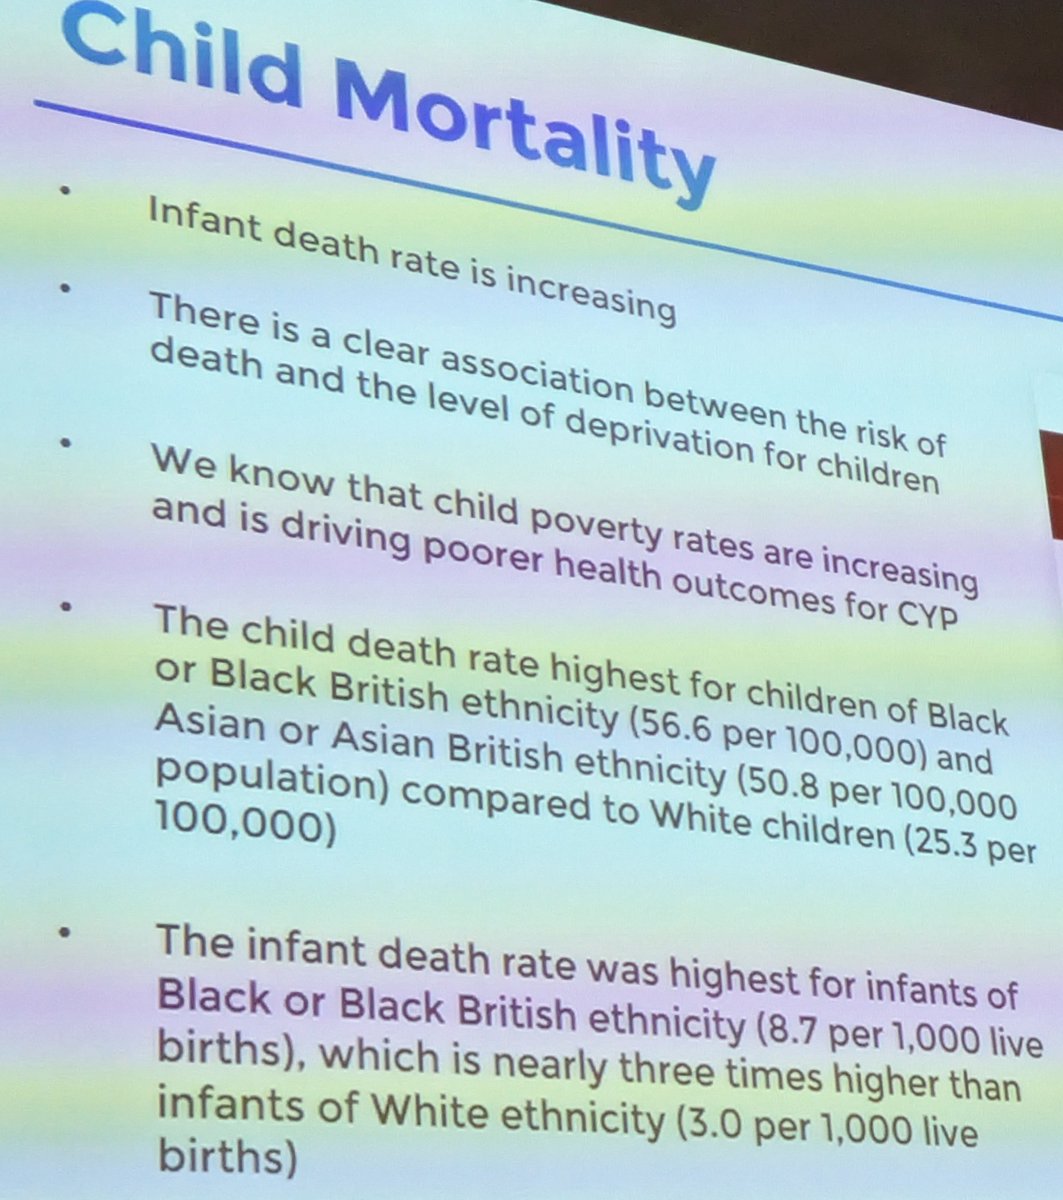 From Dr McKean's talk..
In UK Child death rate highest for Black and Asian ethnicity in comparison to white children.
#SPS2023.

@FionaMckeownNeo we have discussed this issue and the need for QI project around this.